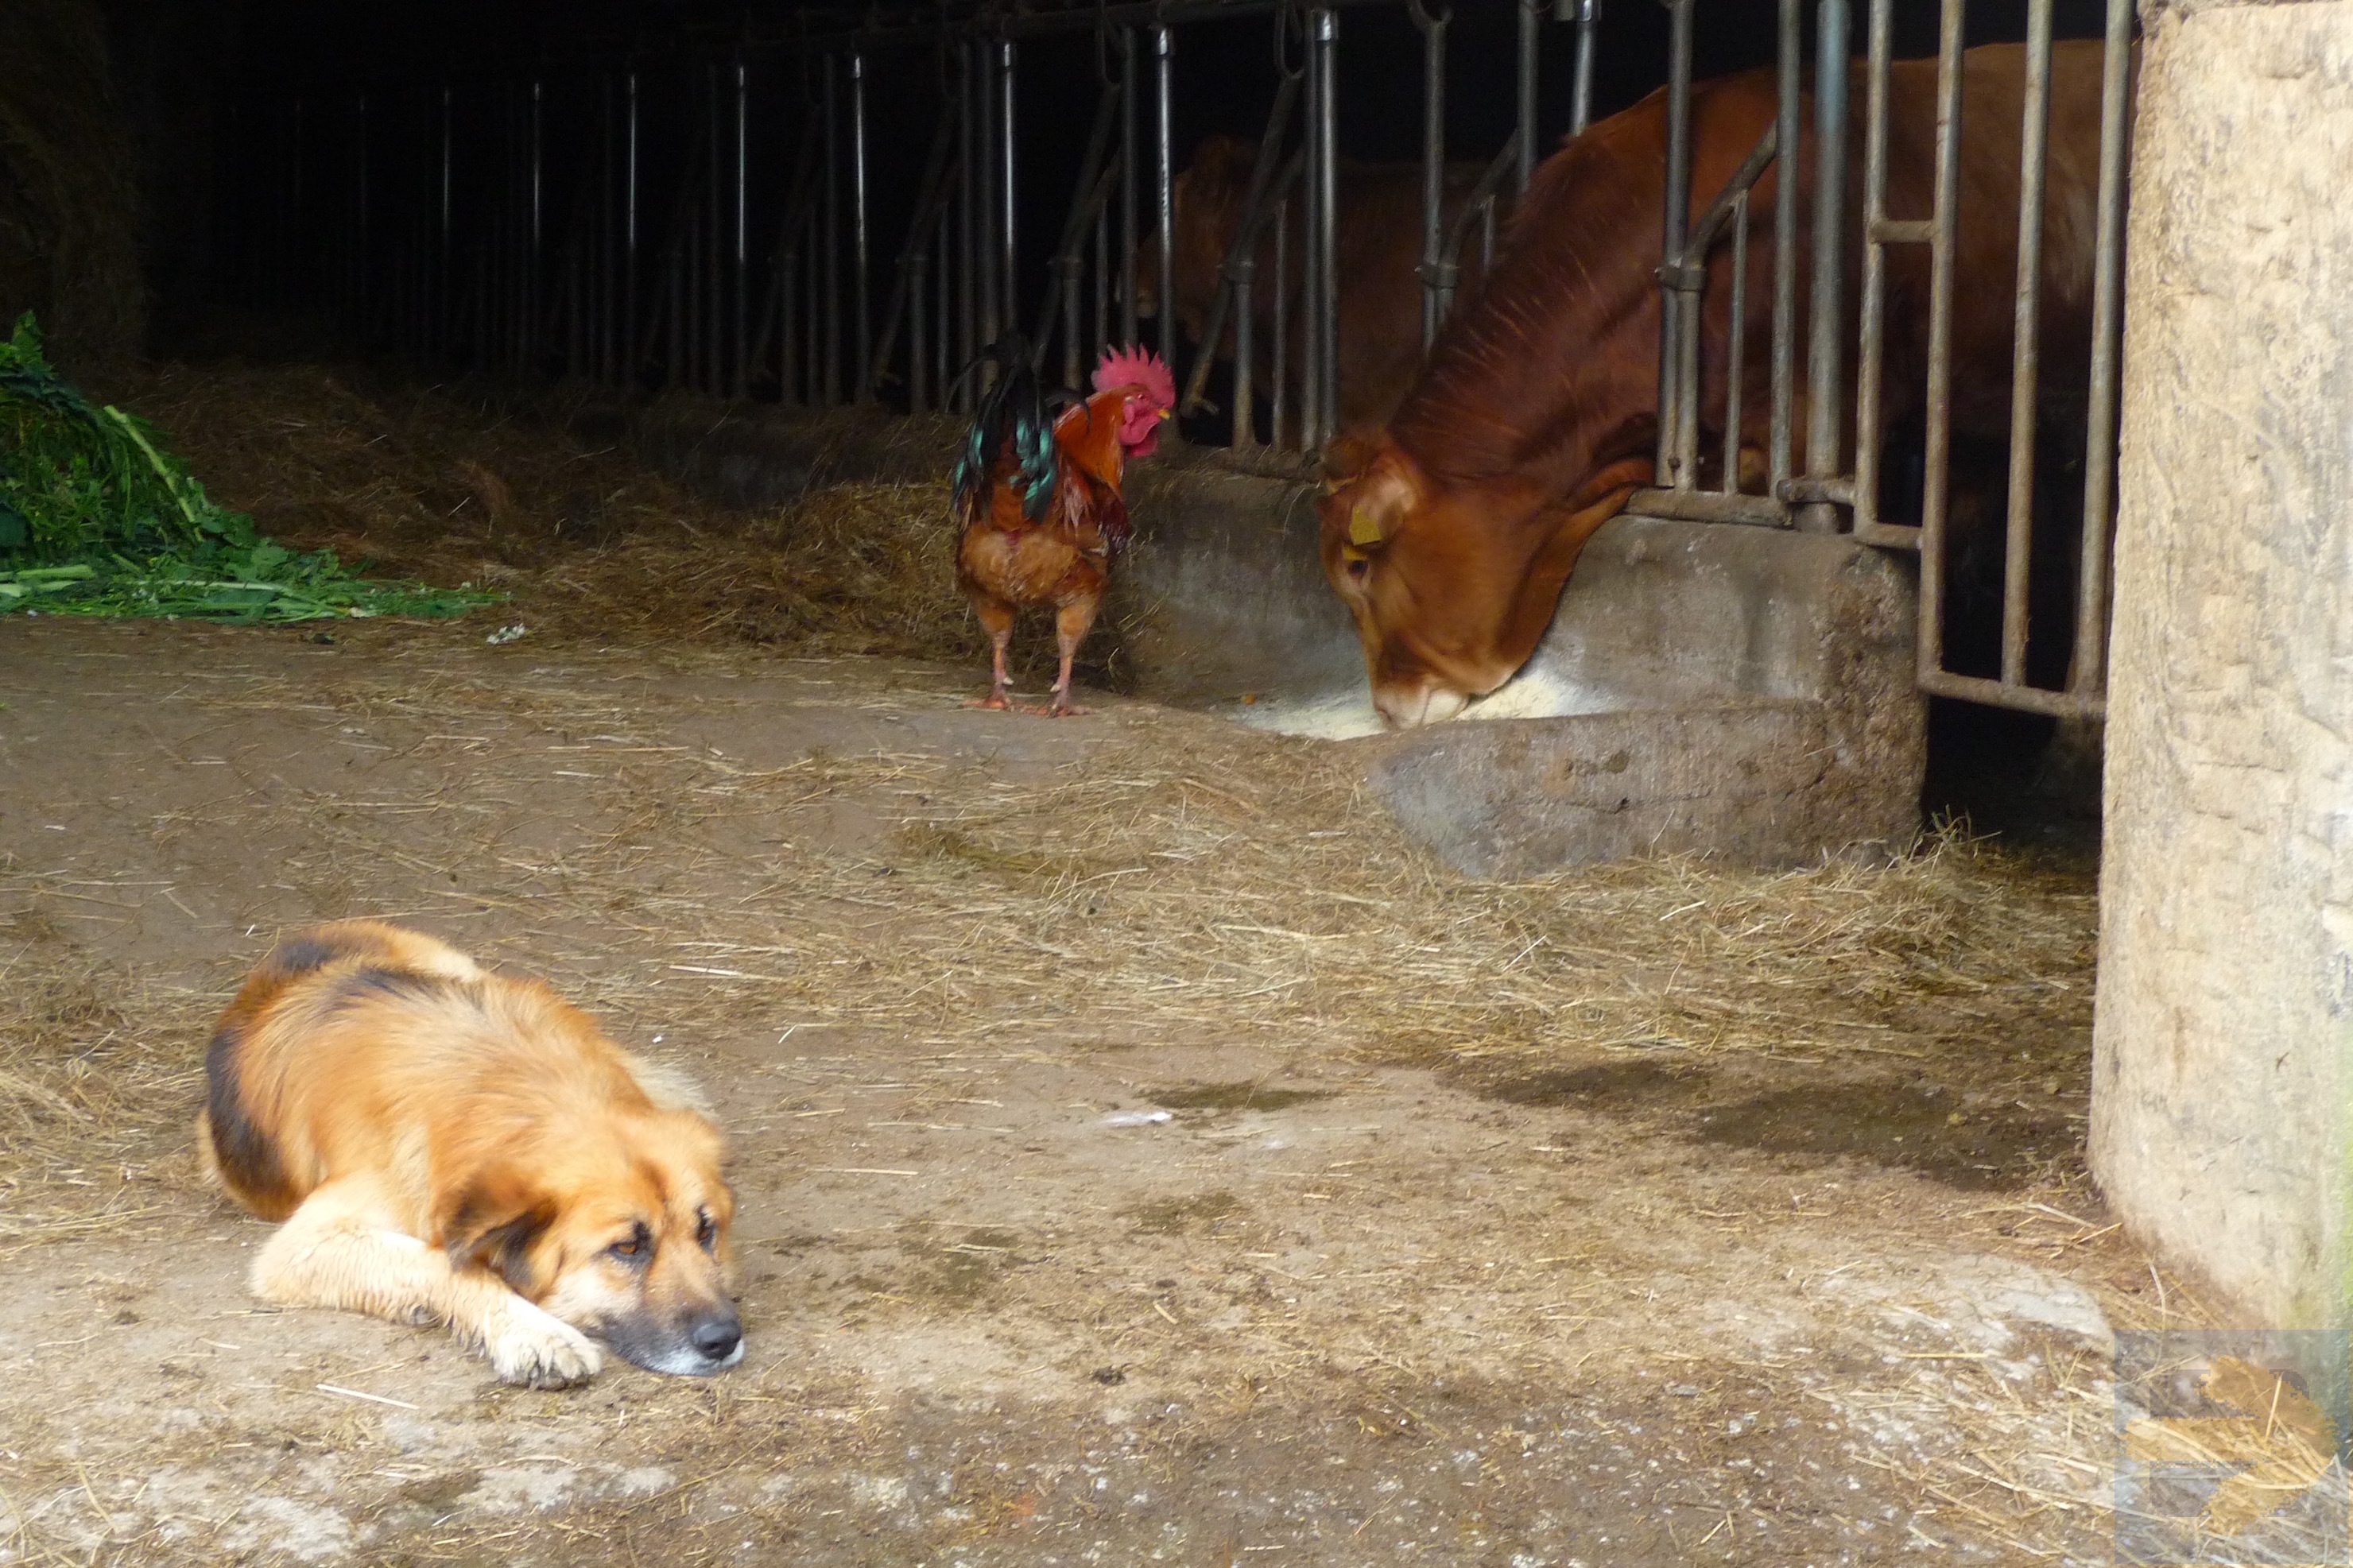 Rural Idyll, dog lies on guard as hen goes to thieve the cows food.